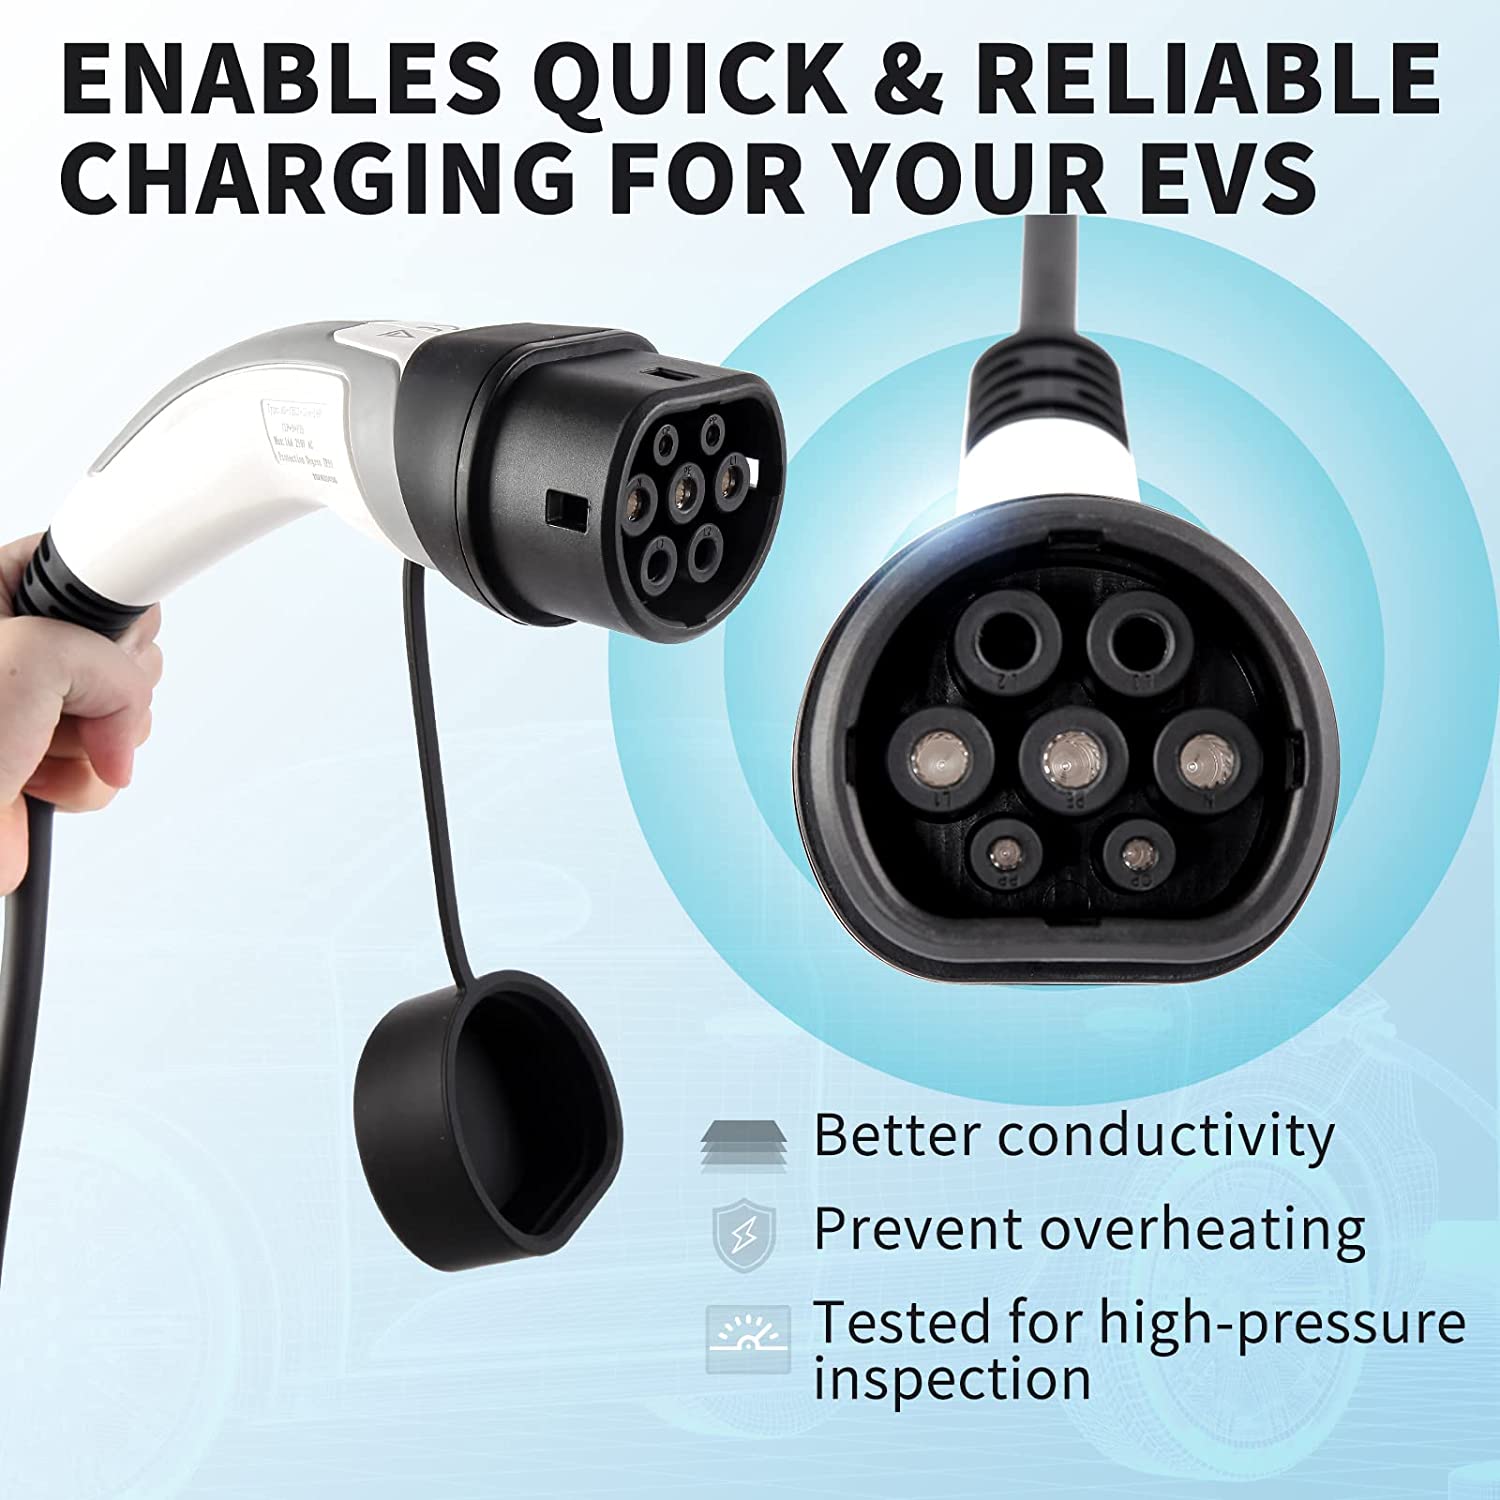 Sharp-Tec 5M / 10M Portable Vehicle Charging Cable EV Type 2 Plug-in Electric UK